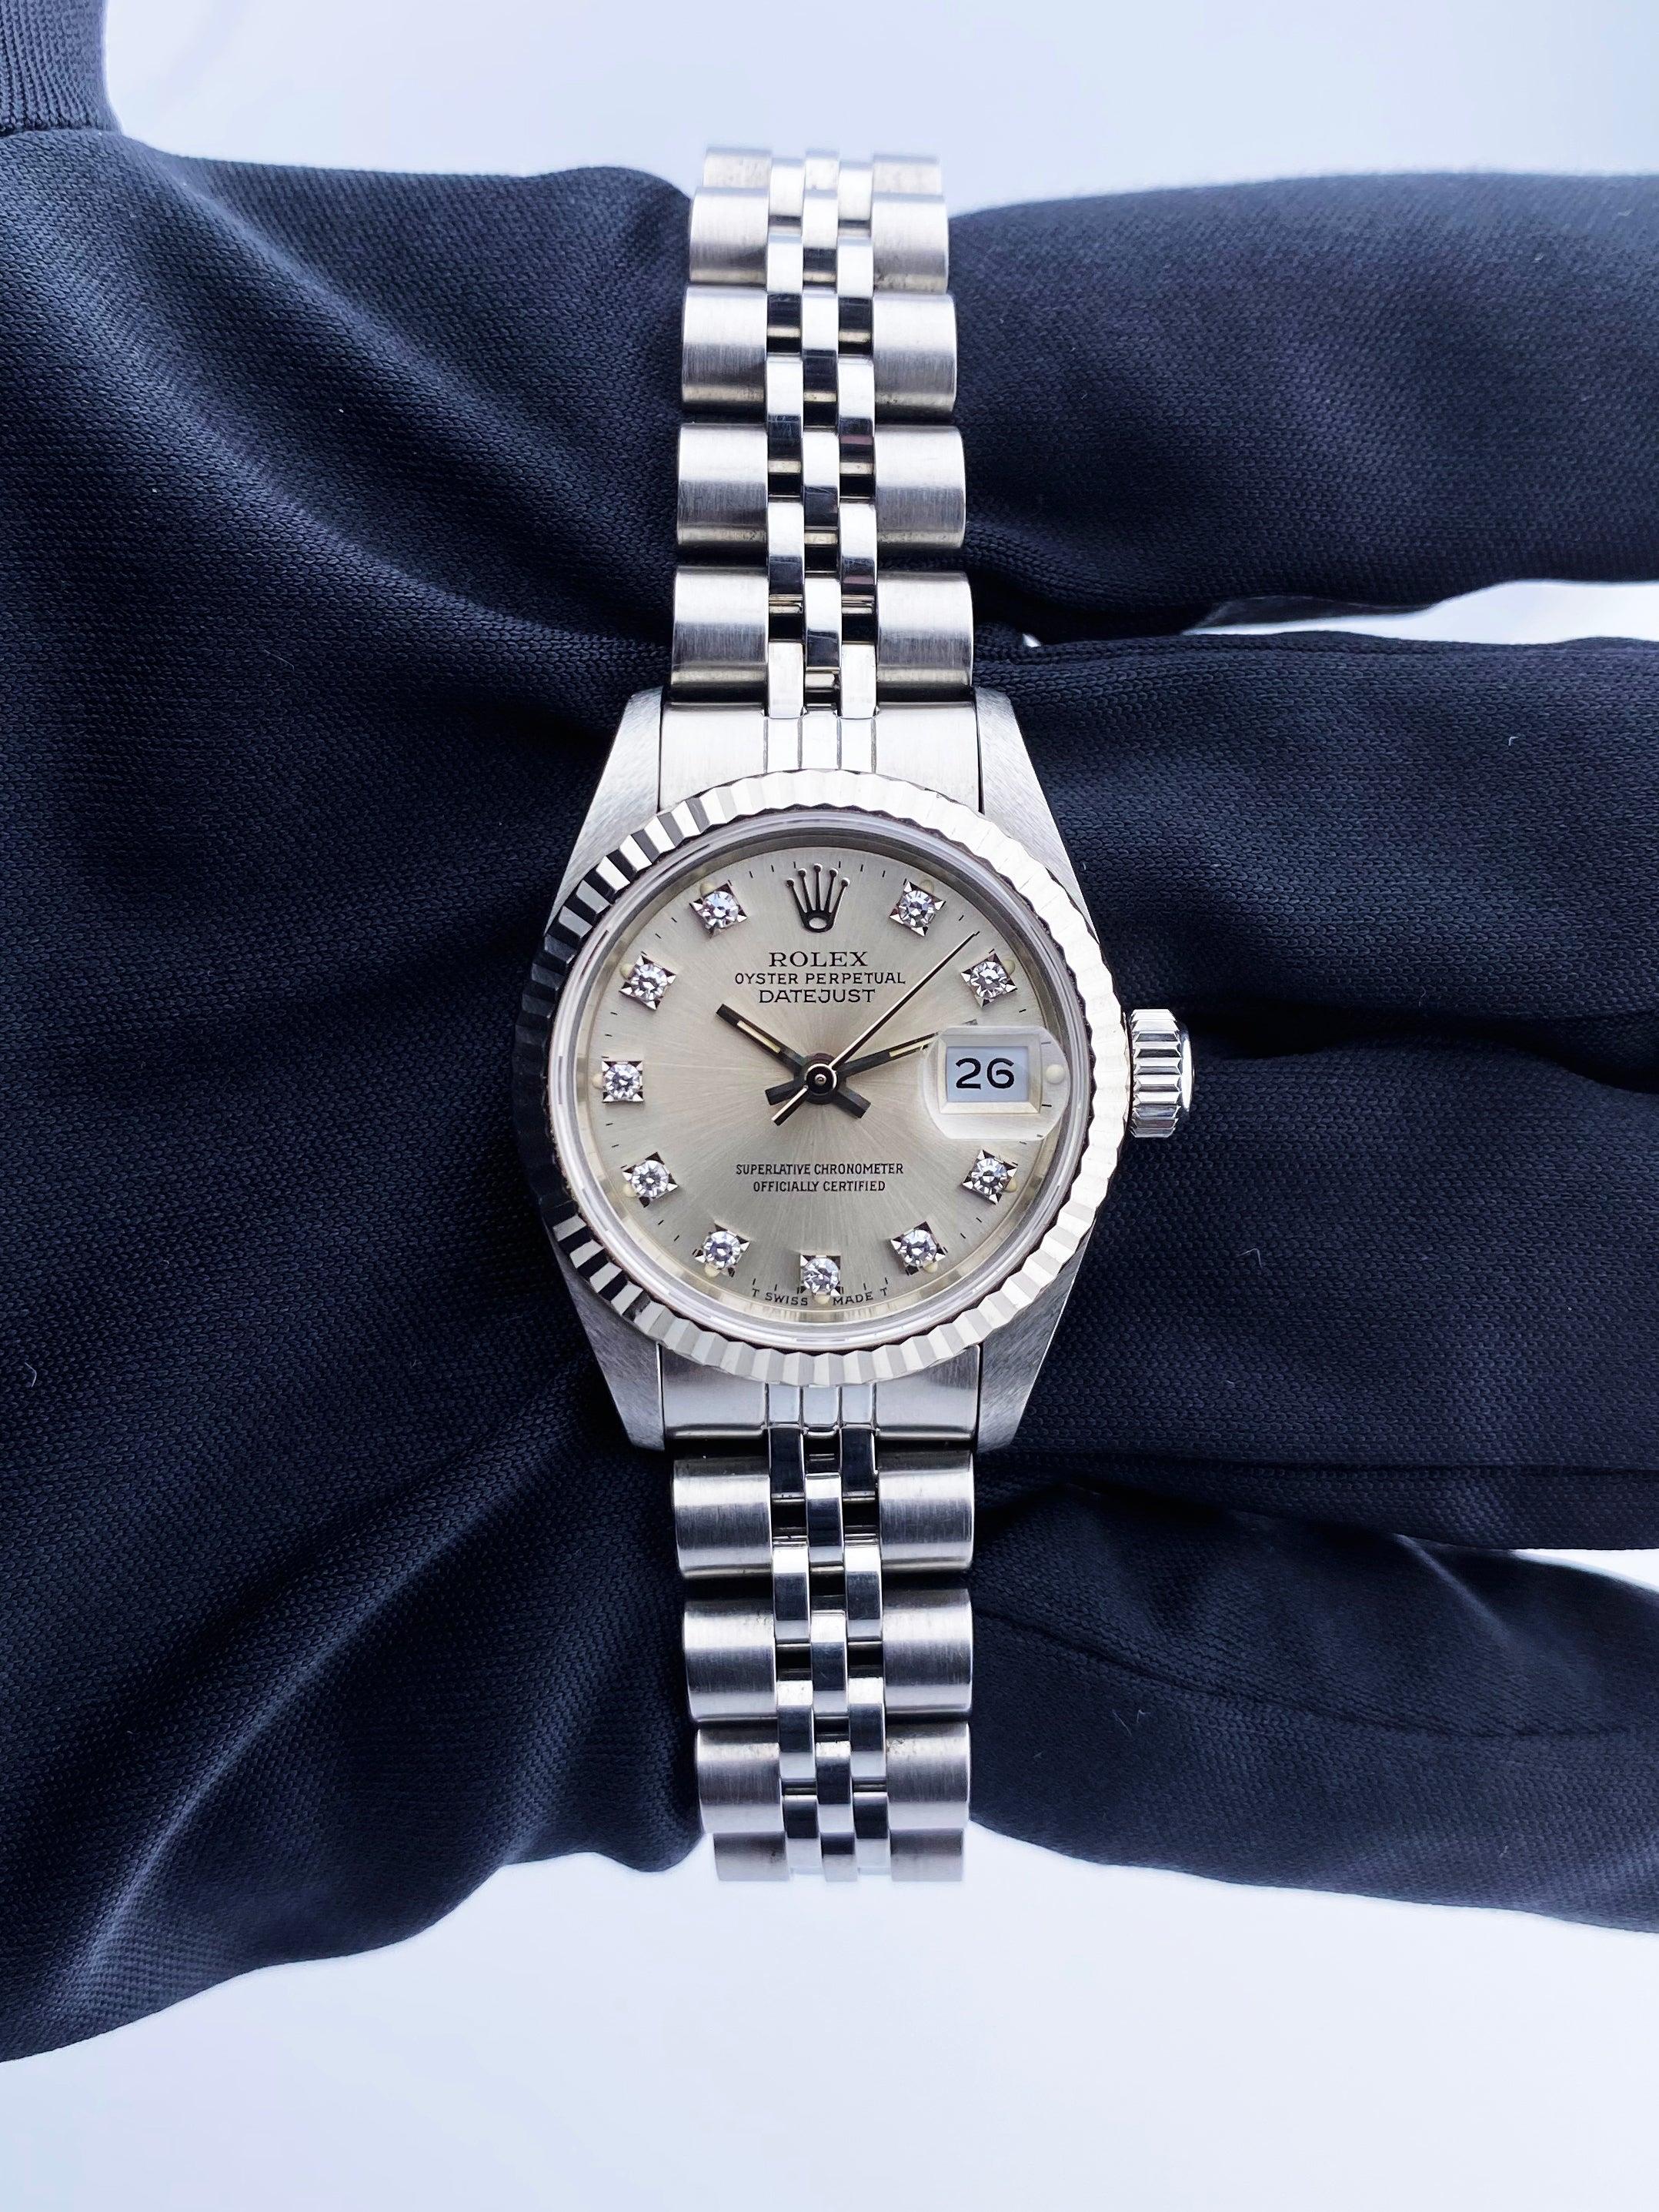 
Rolex Datejust 69174 Ladies Watch. 26mm stainless steel case with 18K white gold fluted bezel. Silver dial with luminous steel hands and original factory diamond set hour markers. Minute markers on the outer dial. Date display at the 3 o'clock